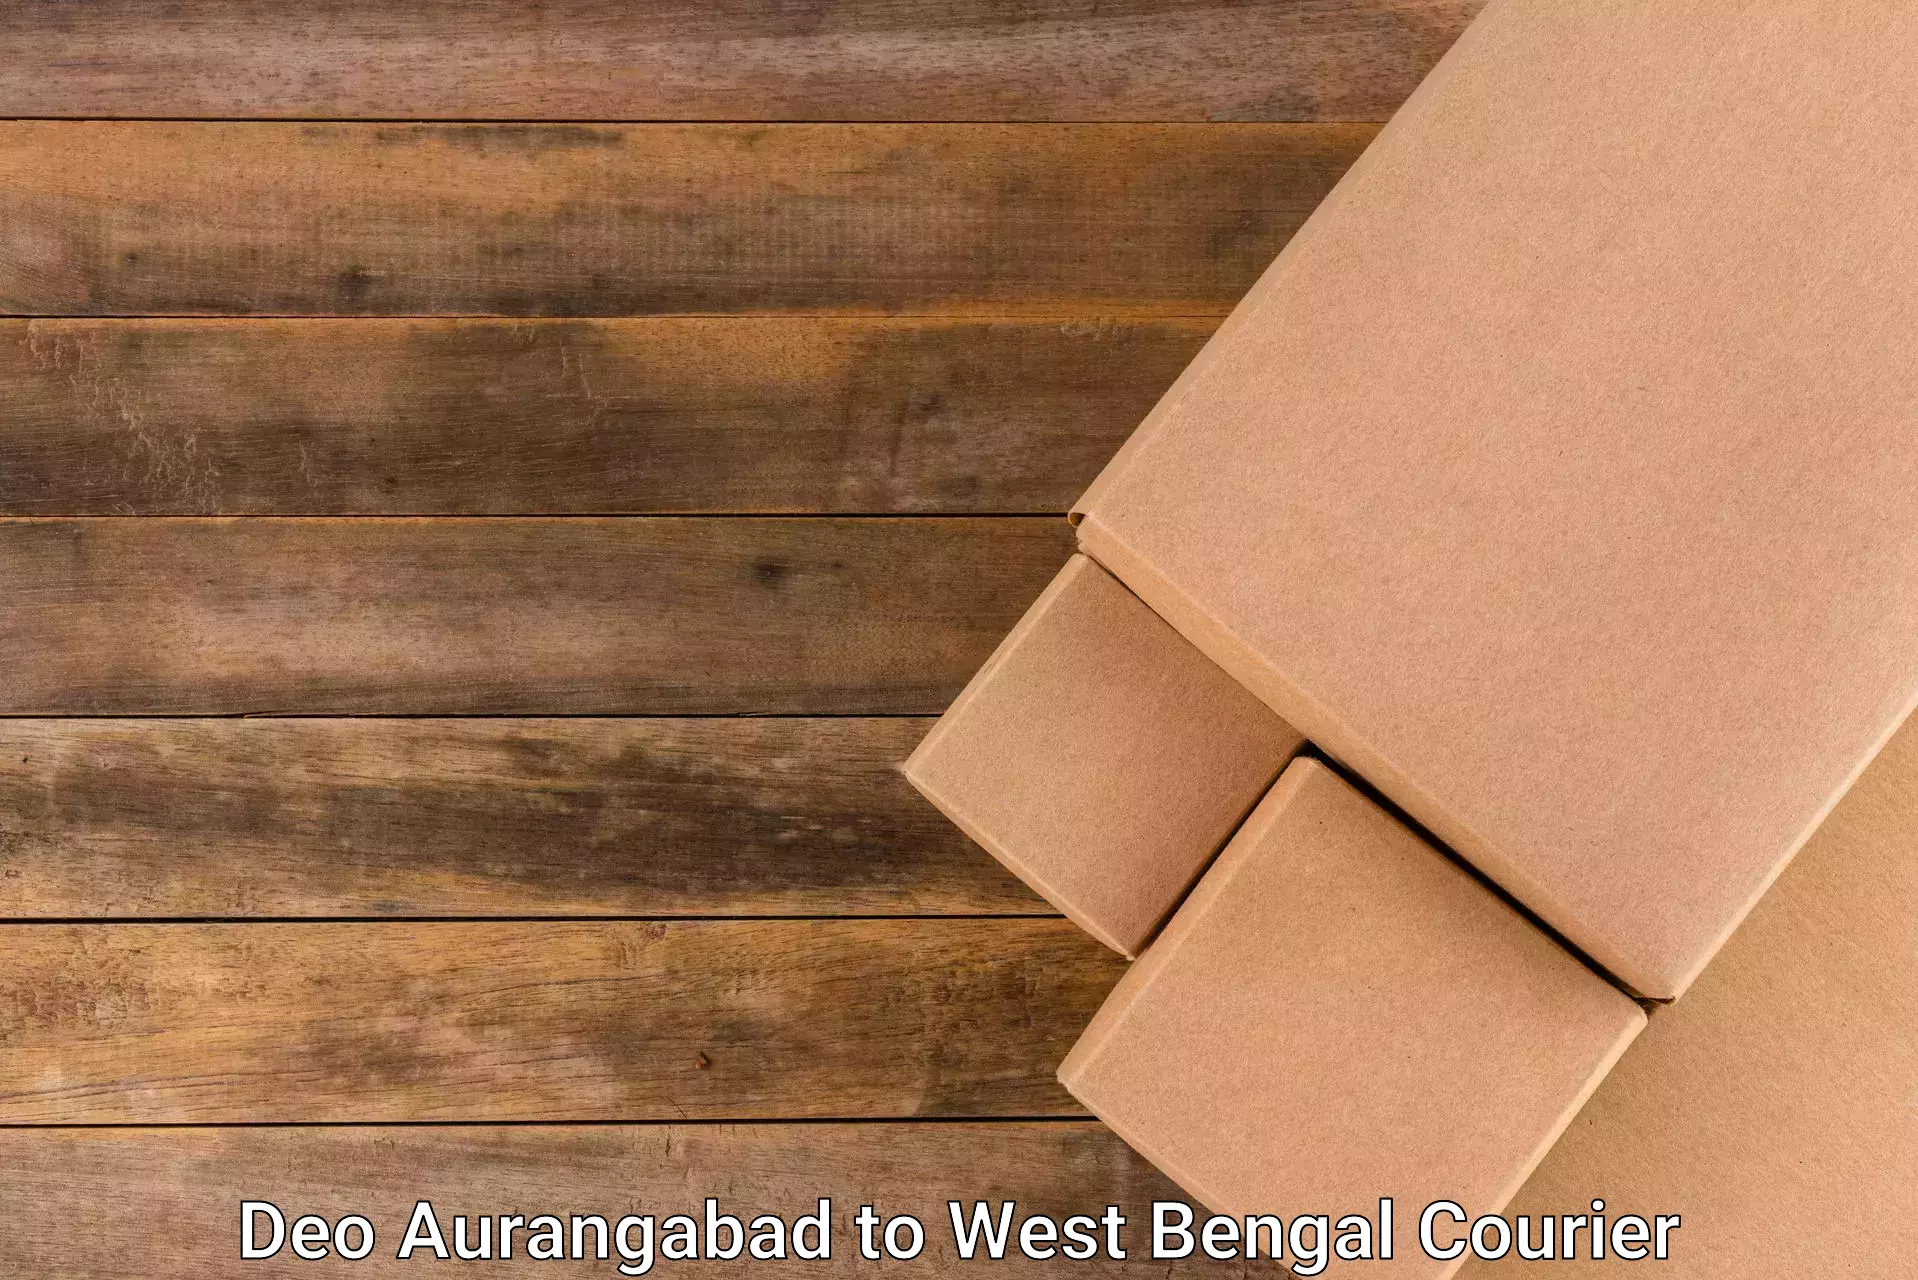 State-of-the-art courier technology Deo Aurangabad to Sonada